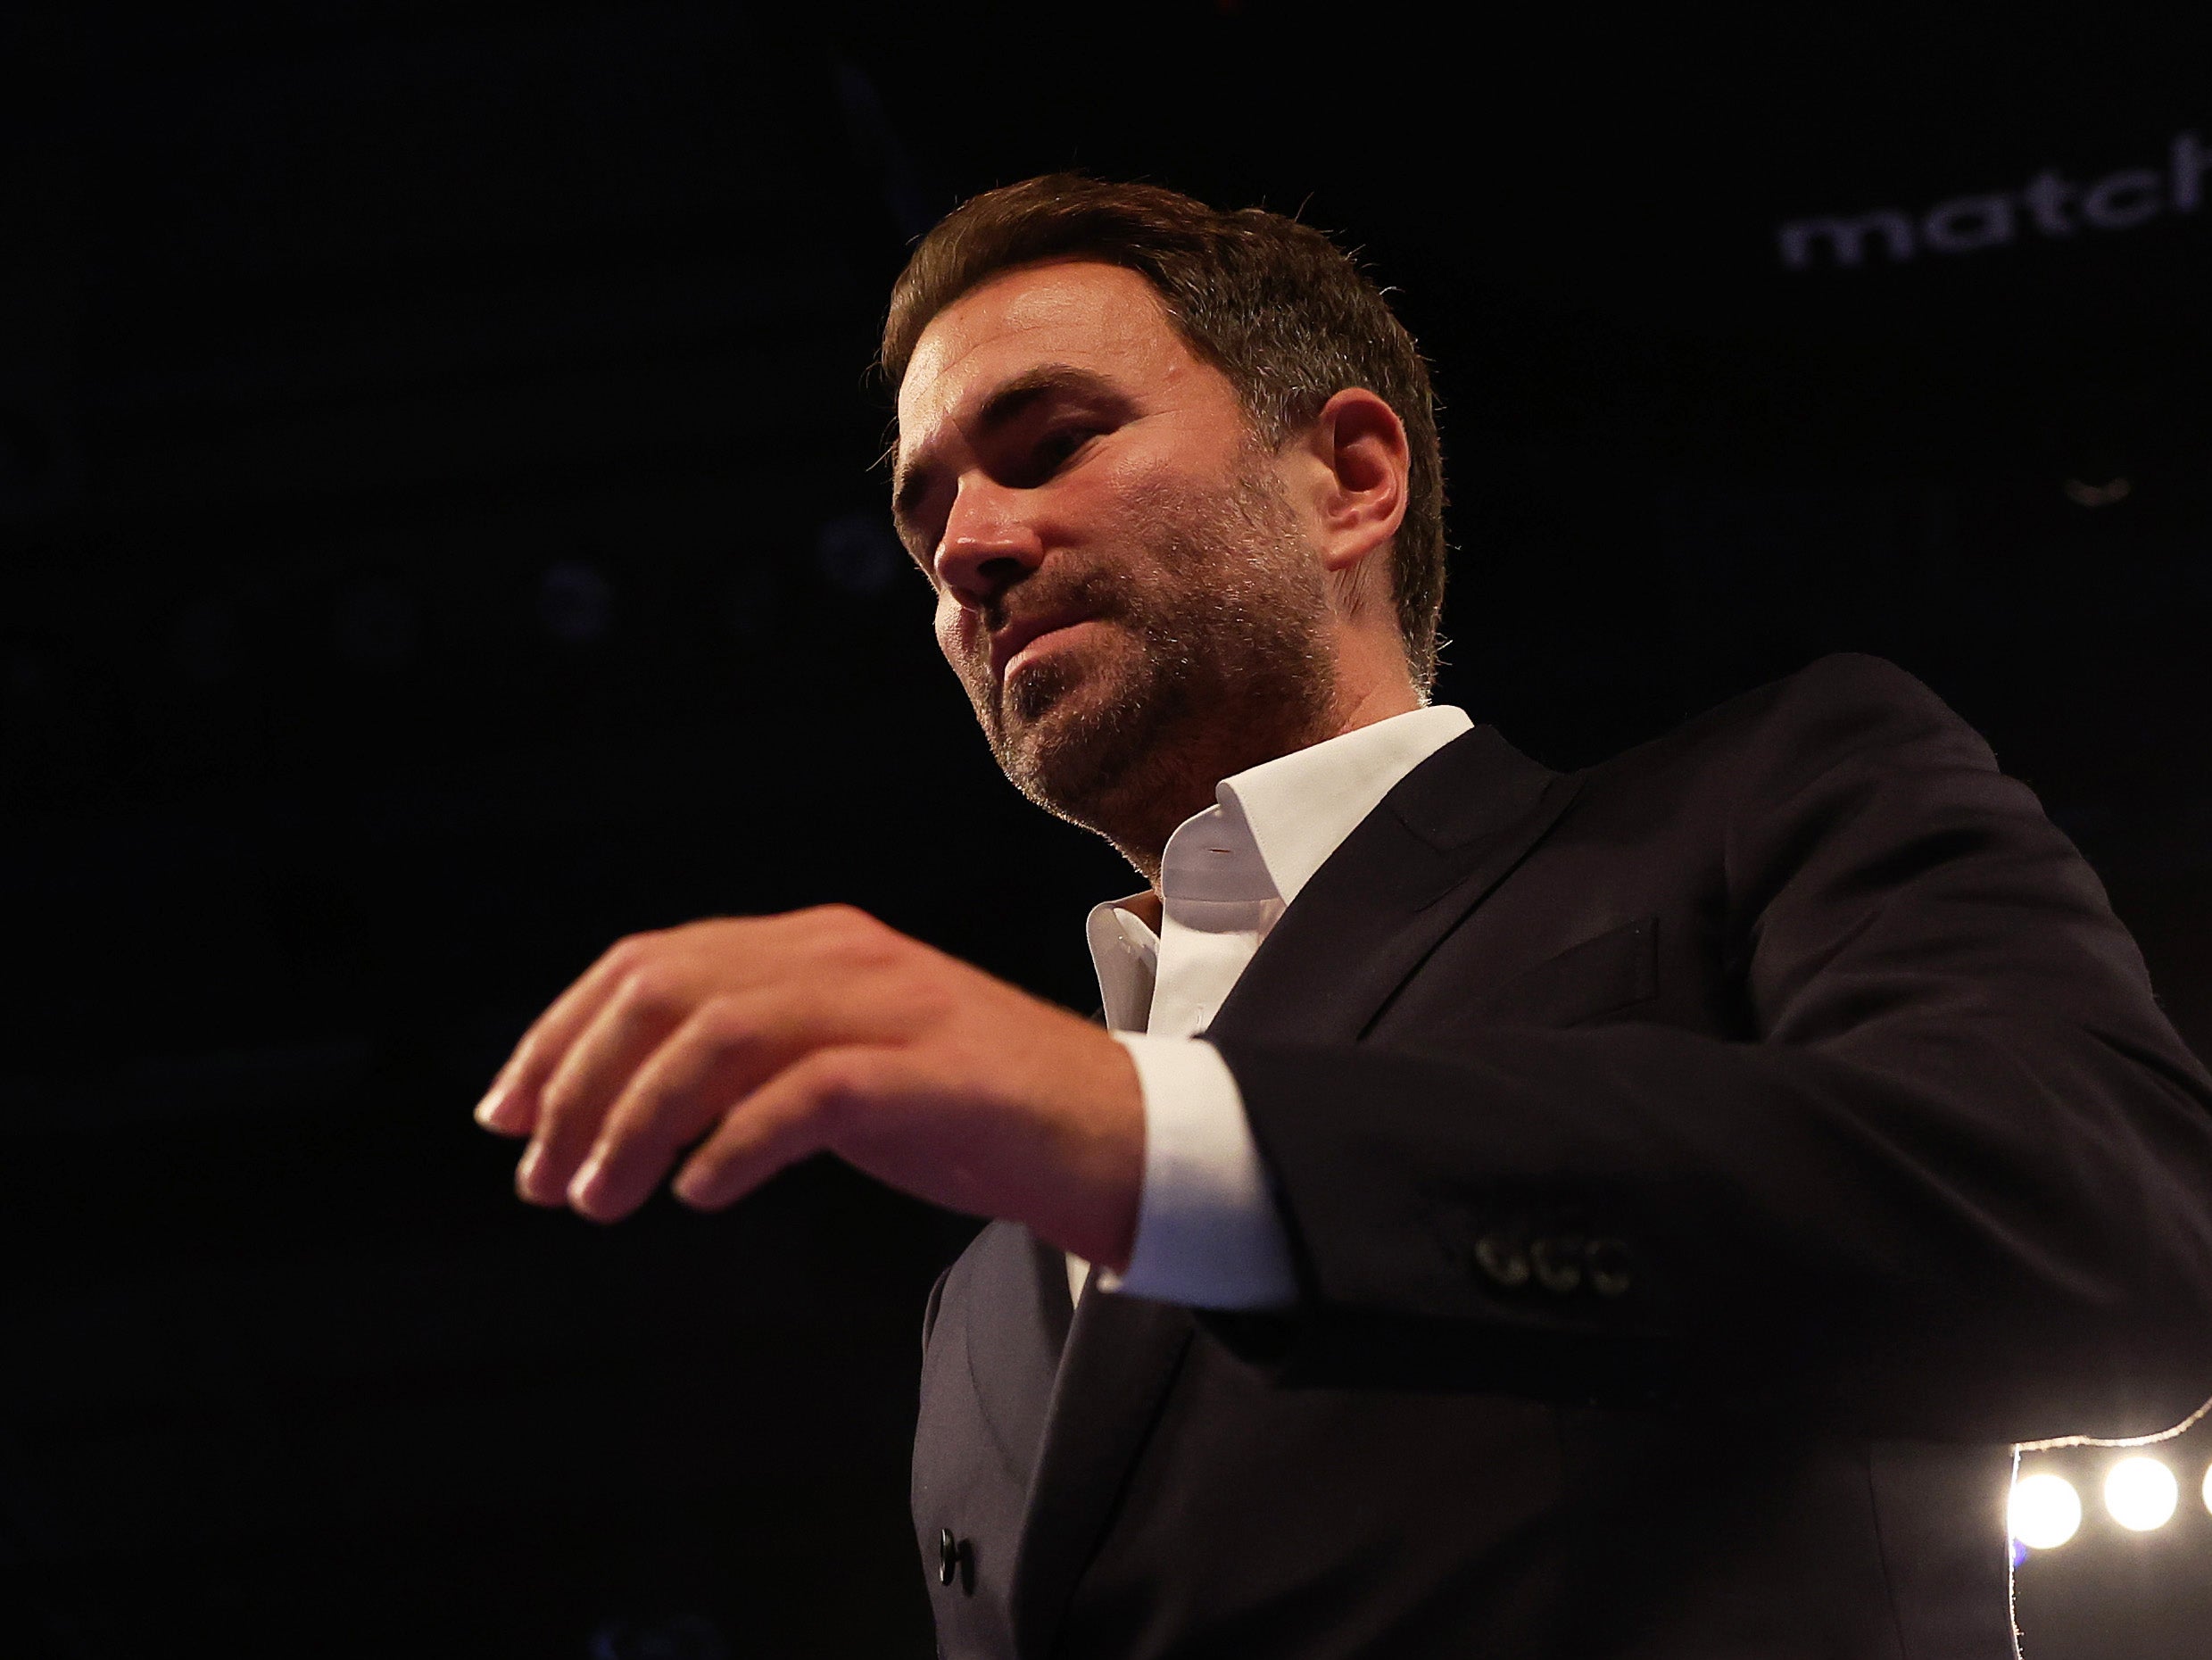 Matchroom Boxing chairman Eddie Hearn promotes Katie Taylor